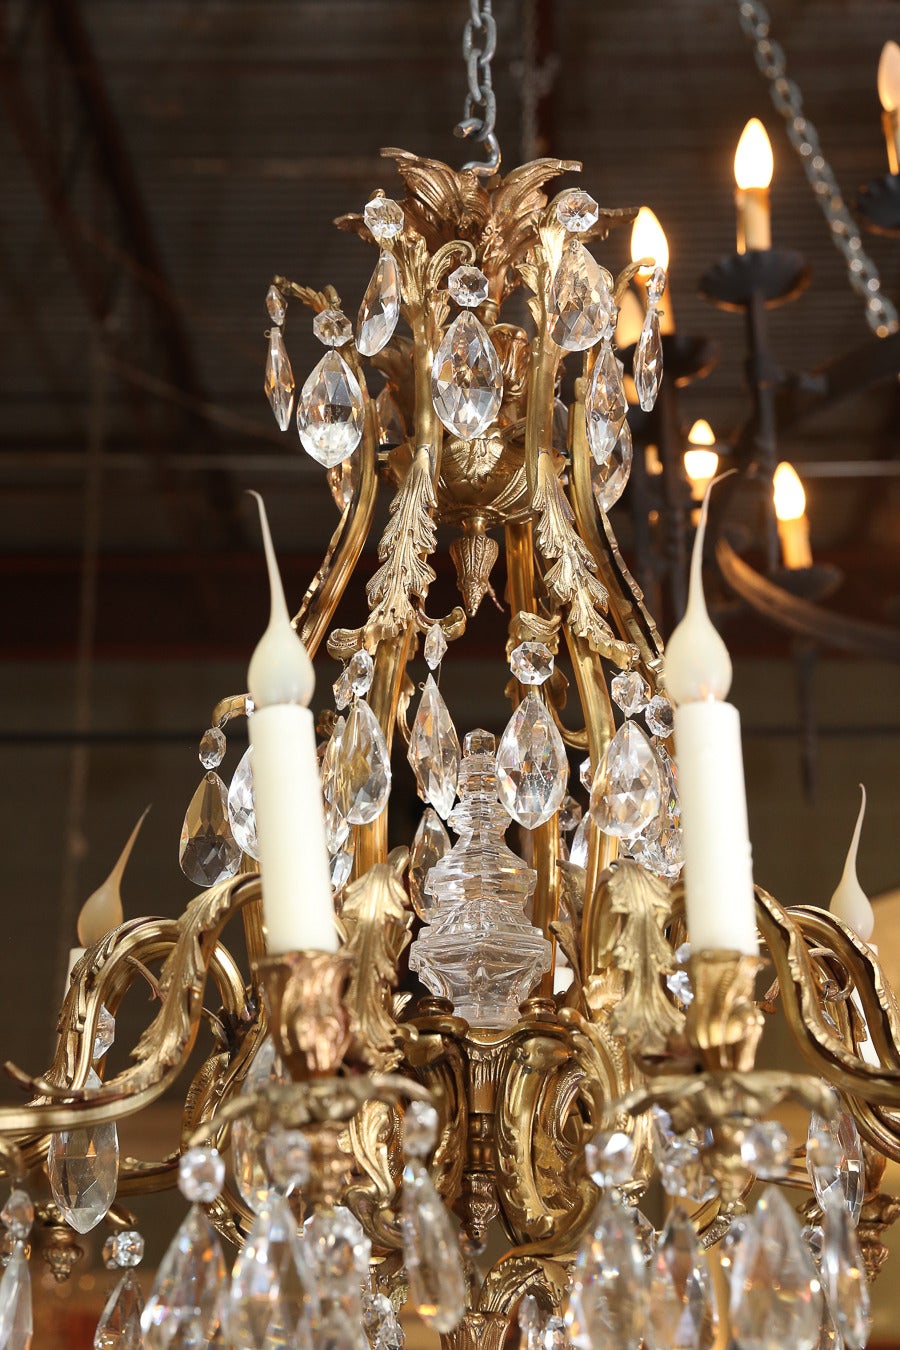 Beautifully detailed chandelier with acanthus leaf arms. Each bobeche has a acanthus leaf holder and finial. Faceted crystal ball at bottom.